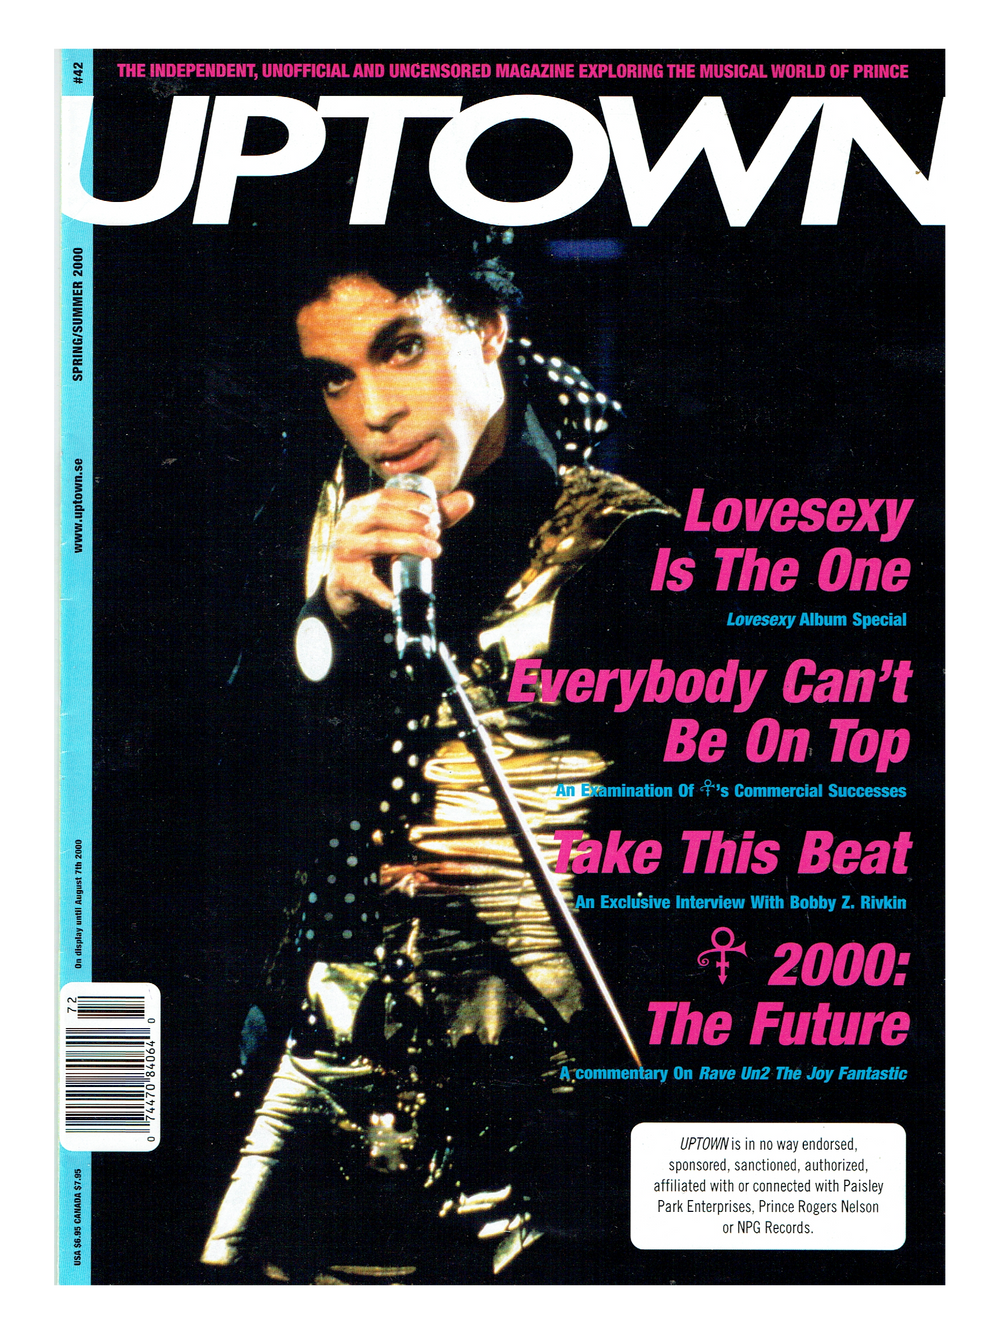 Uptown The Magazine For Prince Fans & Collectors Issue Number 42